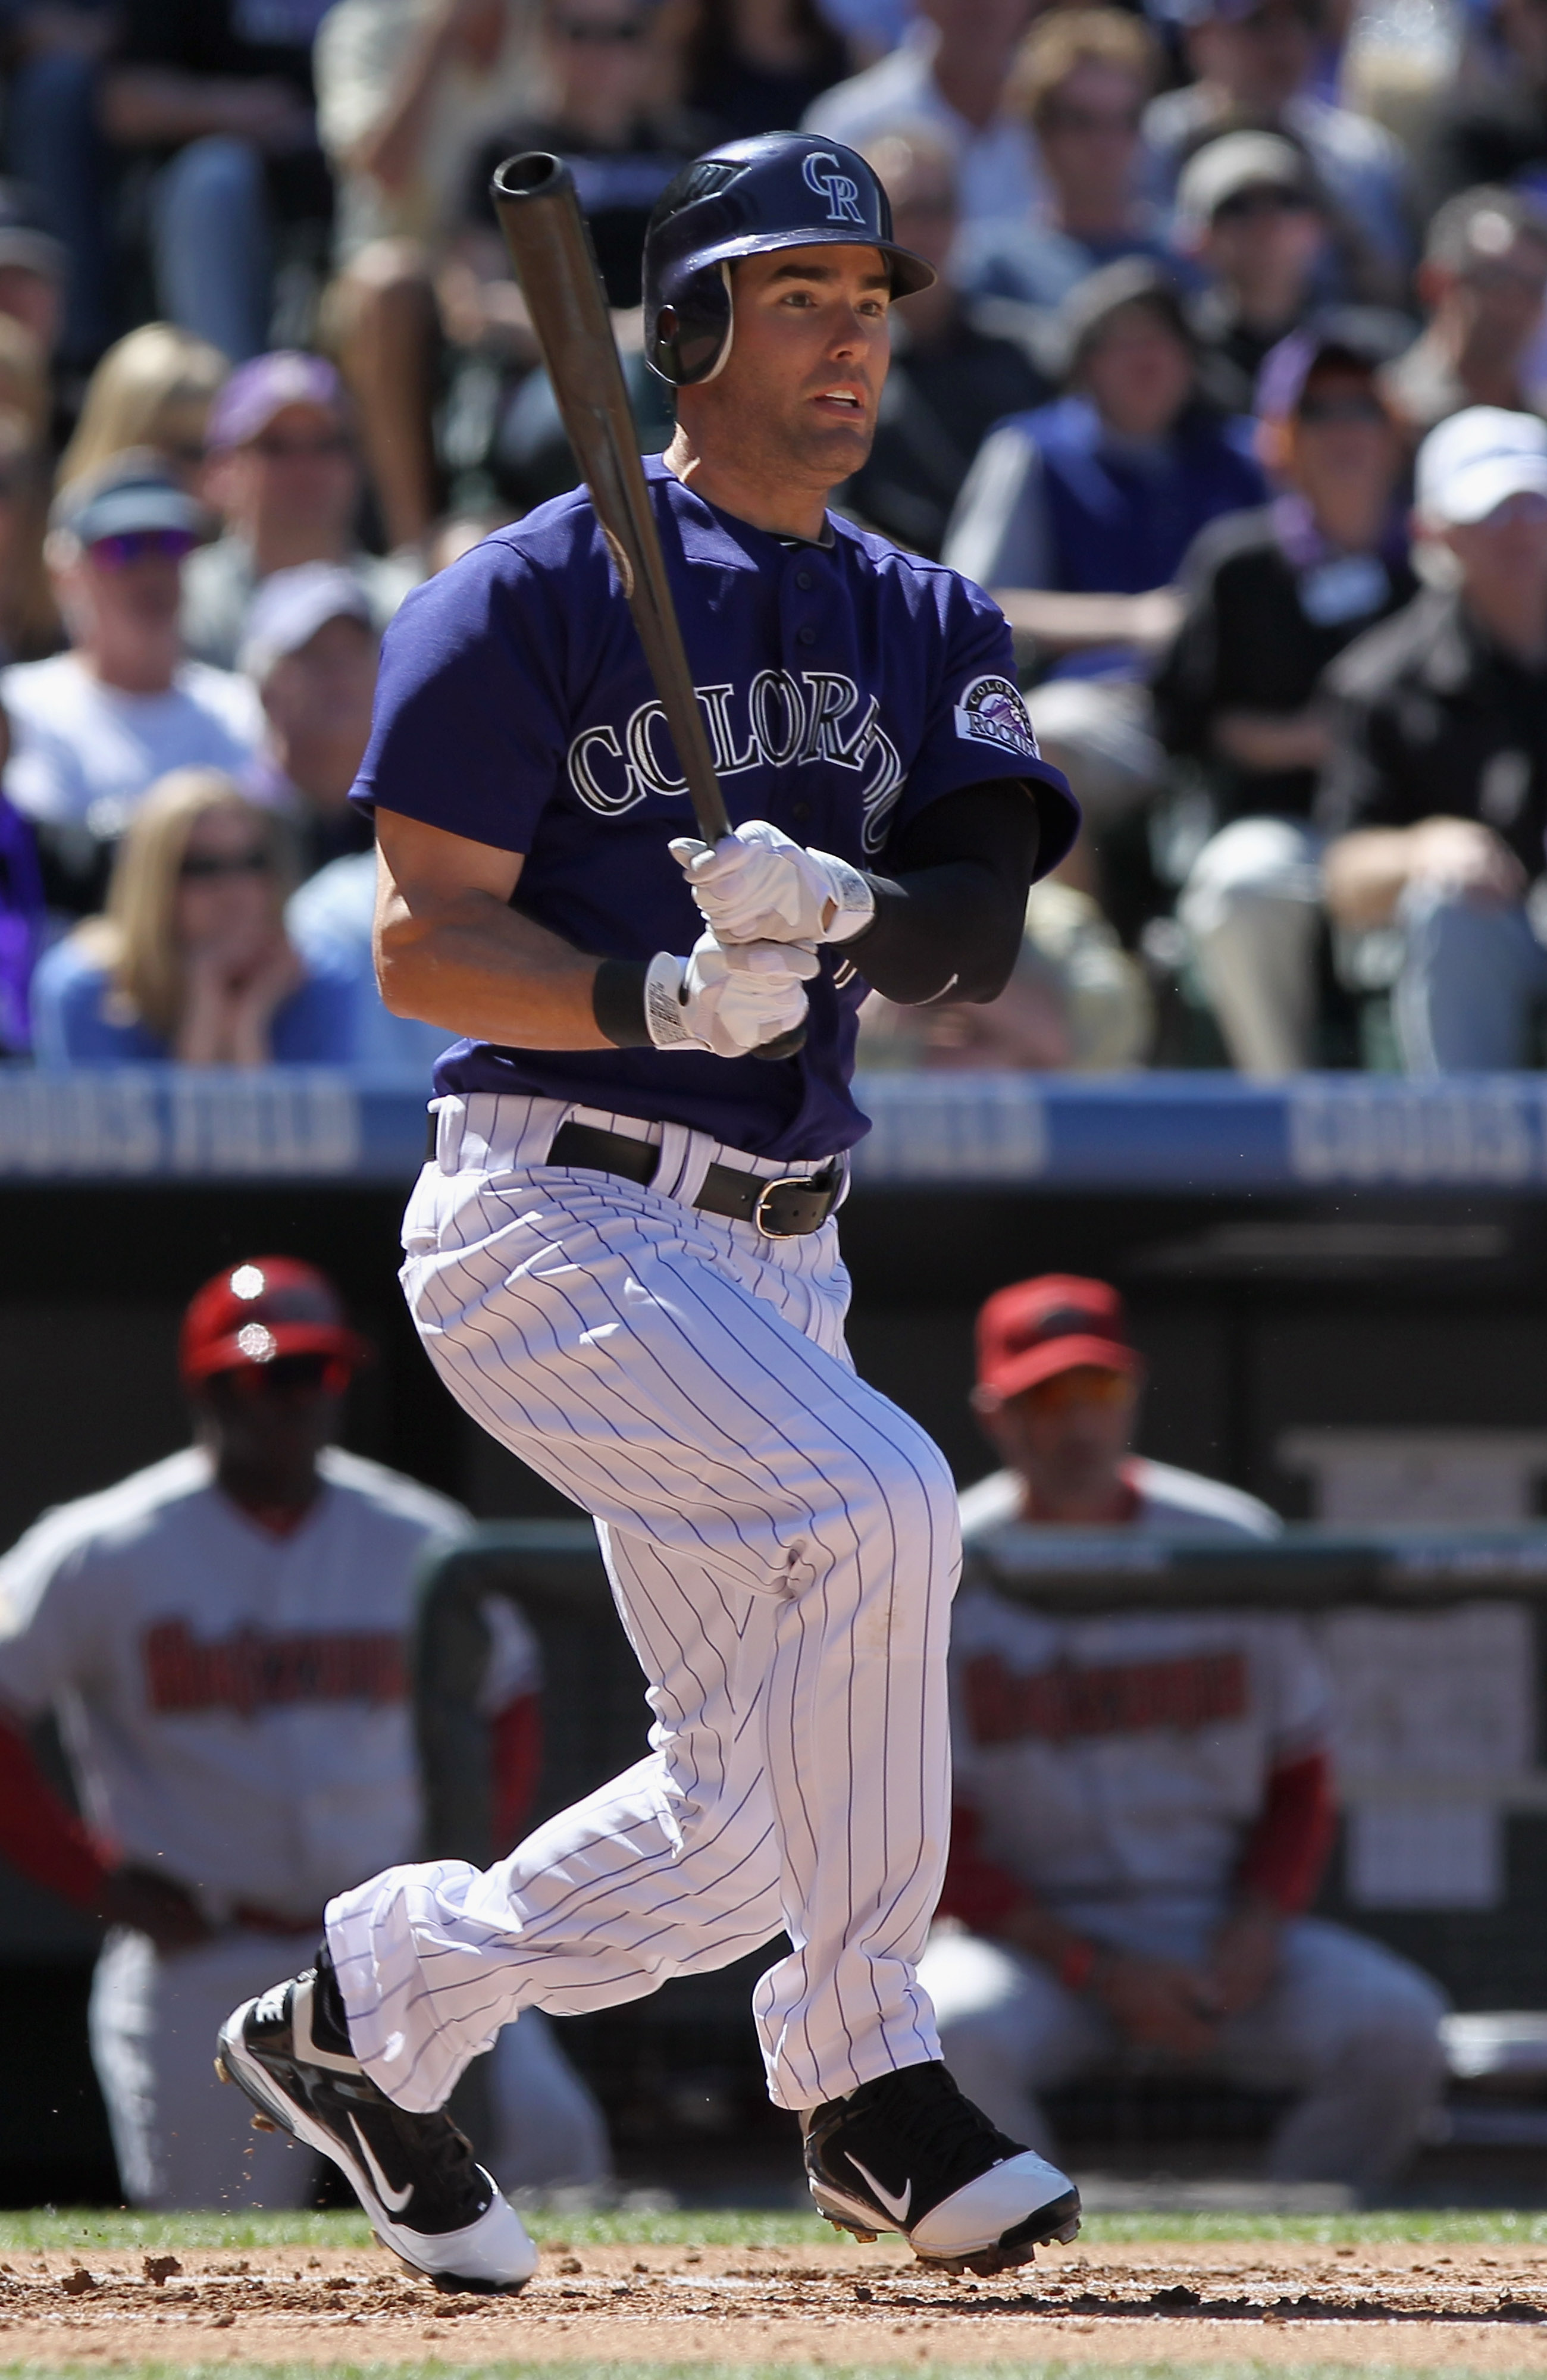 DENVER, CO - APRIL 01:  Outfielder Seth Smith #7 of the Colorado Rockies takes an at bat against the Arizona Diamondbacks during Opening Day at Coors Field on April 1, 2011 in Denver, Colorado.  (Photo by Doug Pensinger/Getty Images)